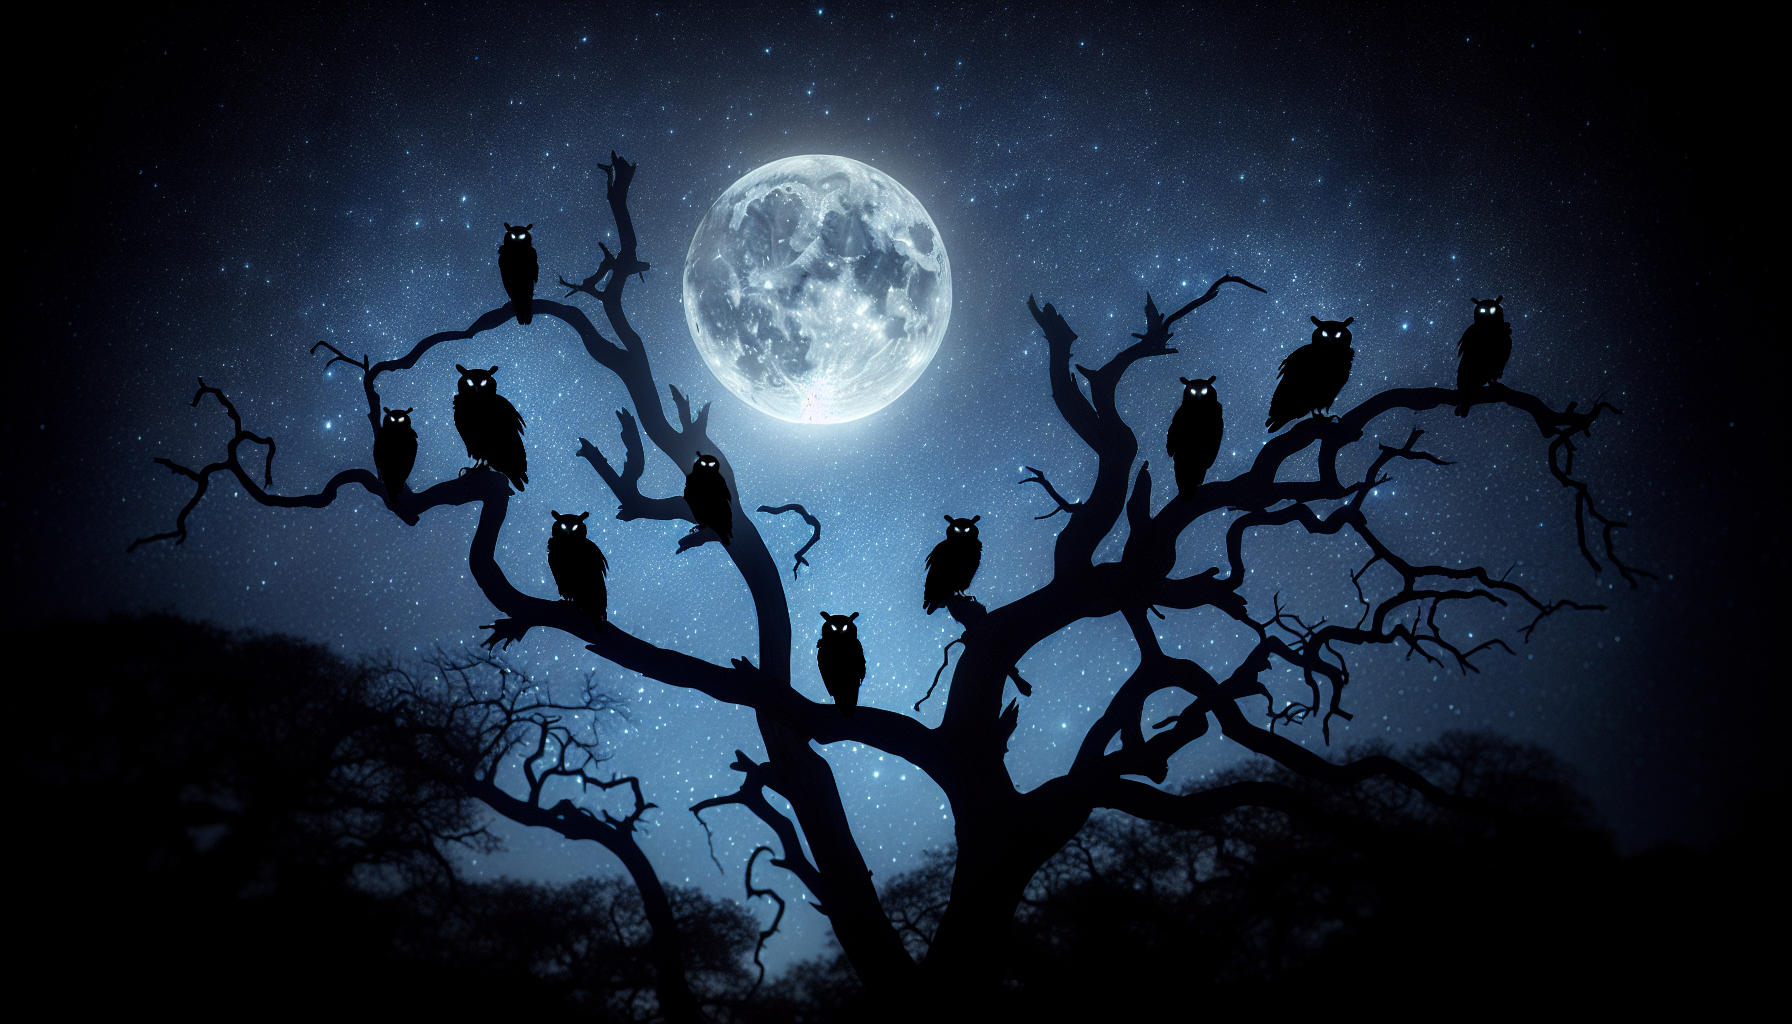 Silhouette of nocturnal birds perched on branches at night